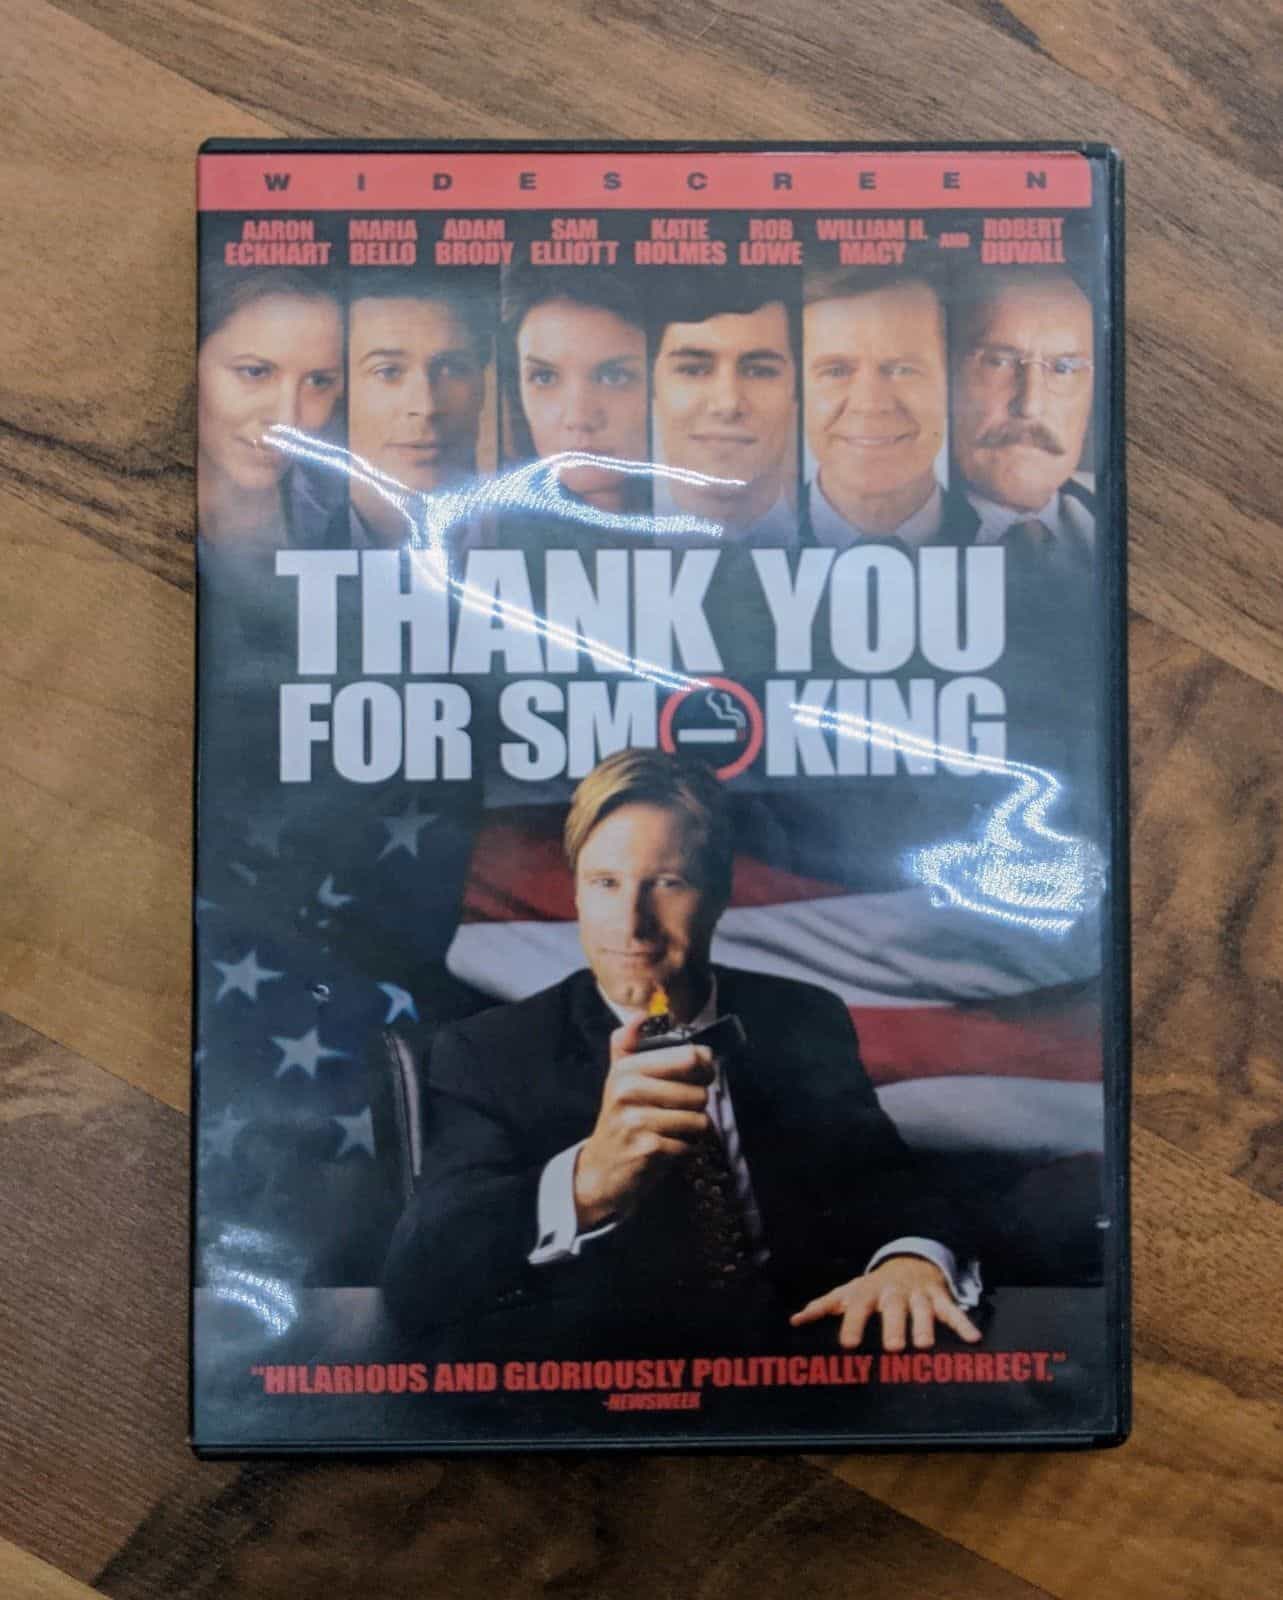 Thank You For Smoking DVD Movie – widescreen edition